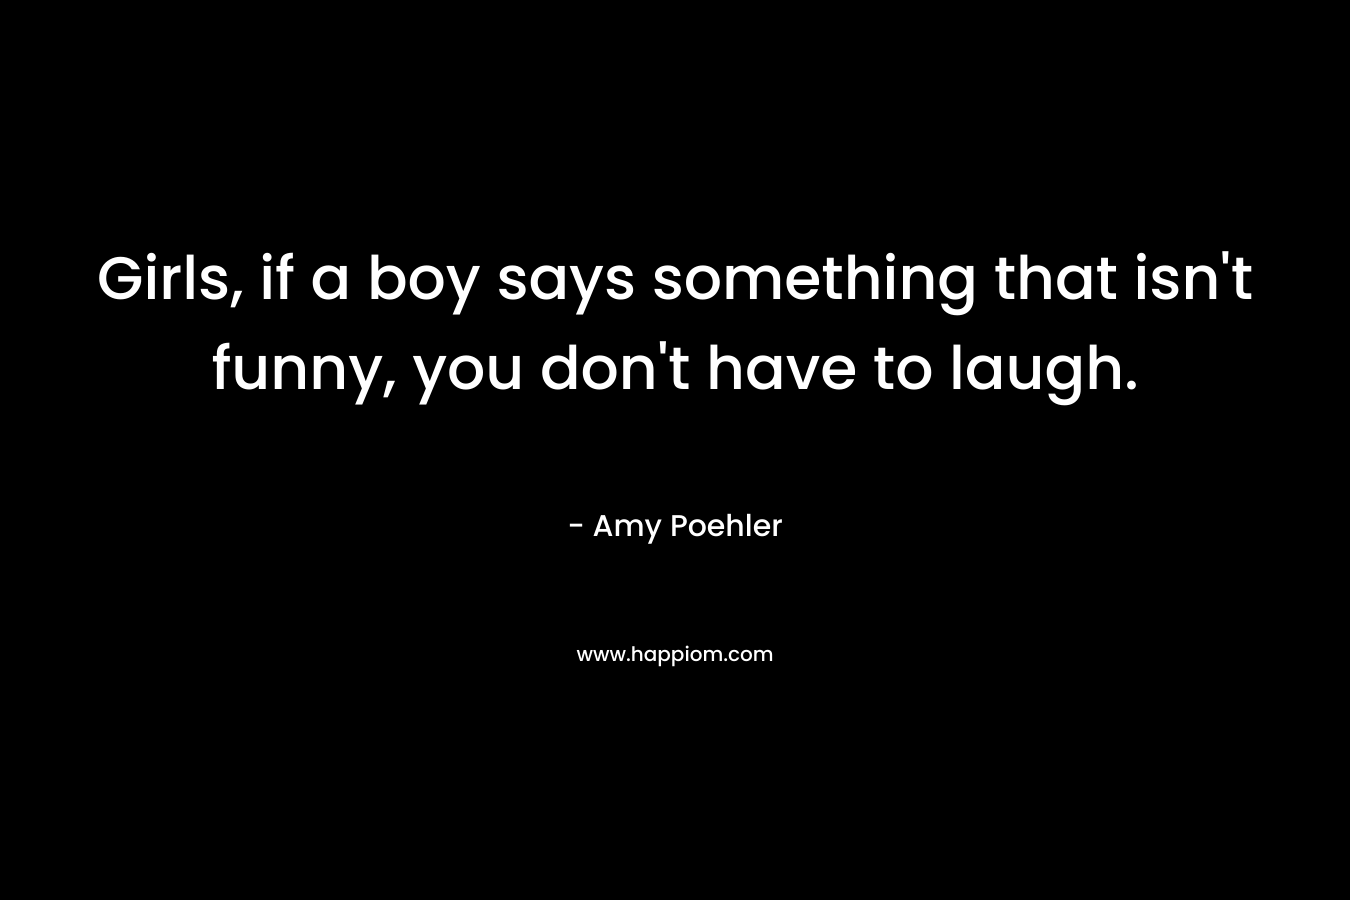 Girls, if a boy says something that isn’t funny, you don’t have to laugh. – Amy Poehler